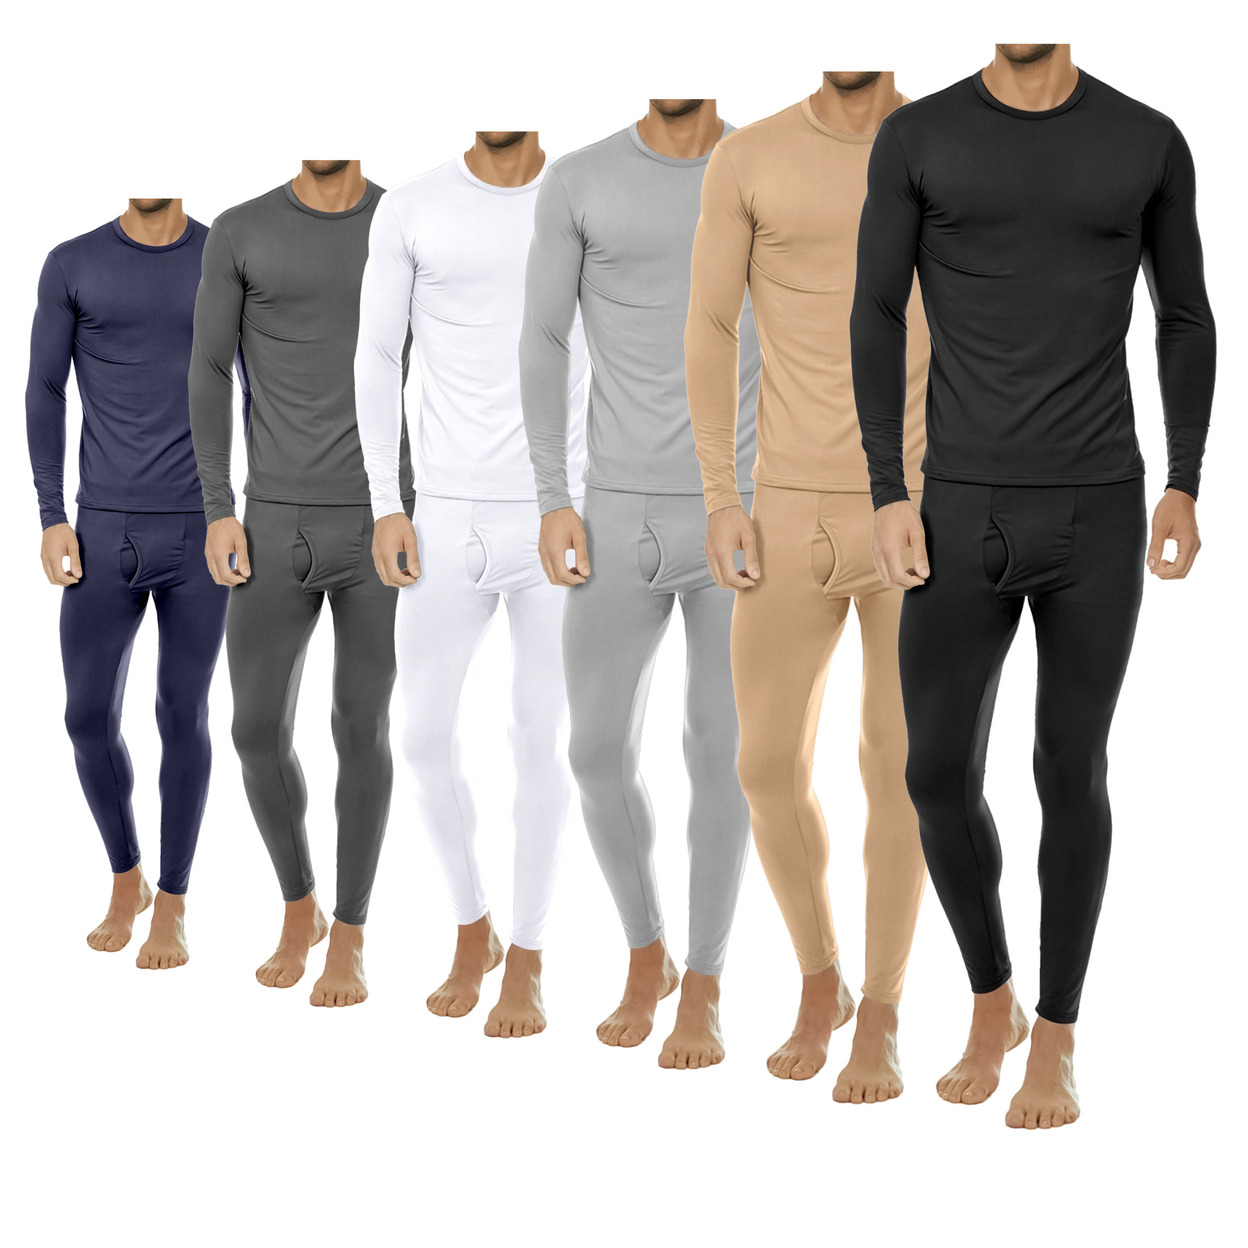 2-Pieces: Men's Winter Warm Fleece Lined Thermal Underwear Set For Cold Weather - Grey, Large